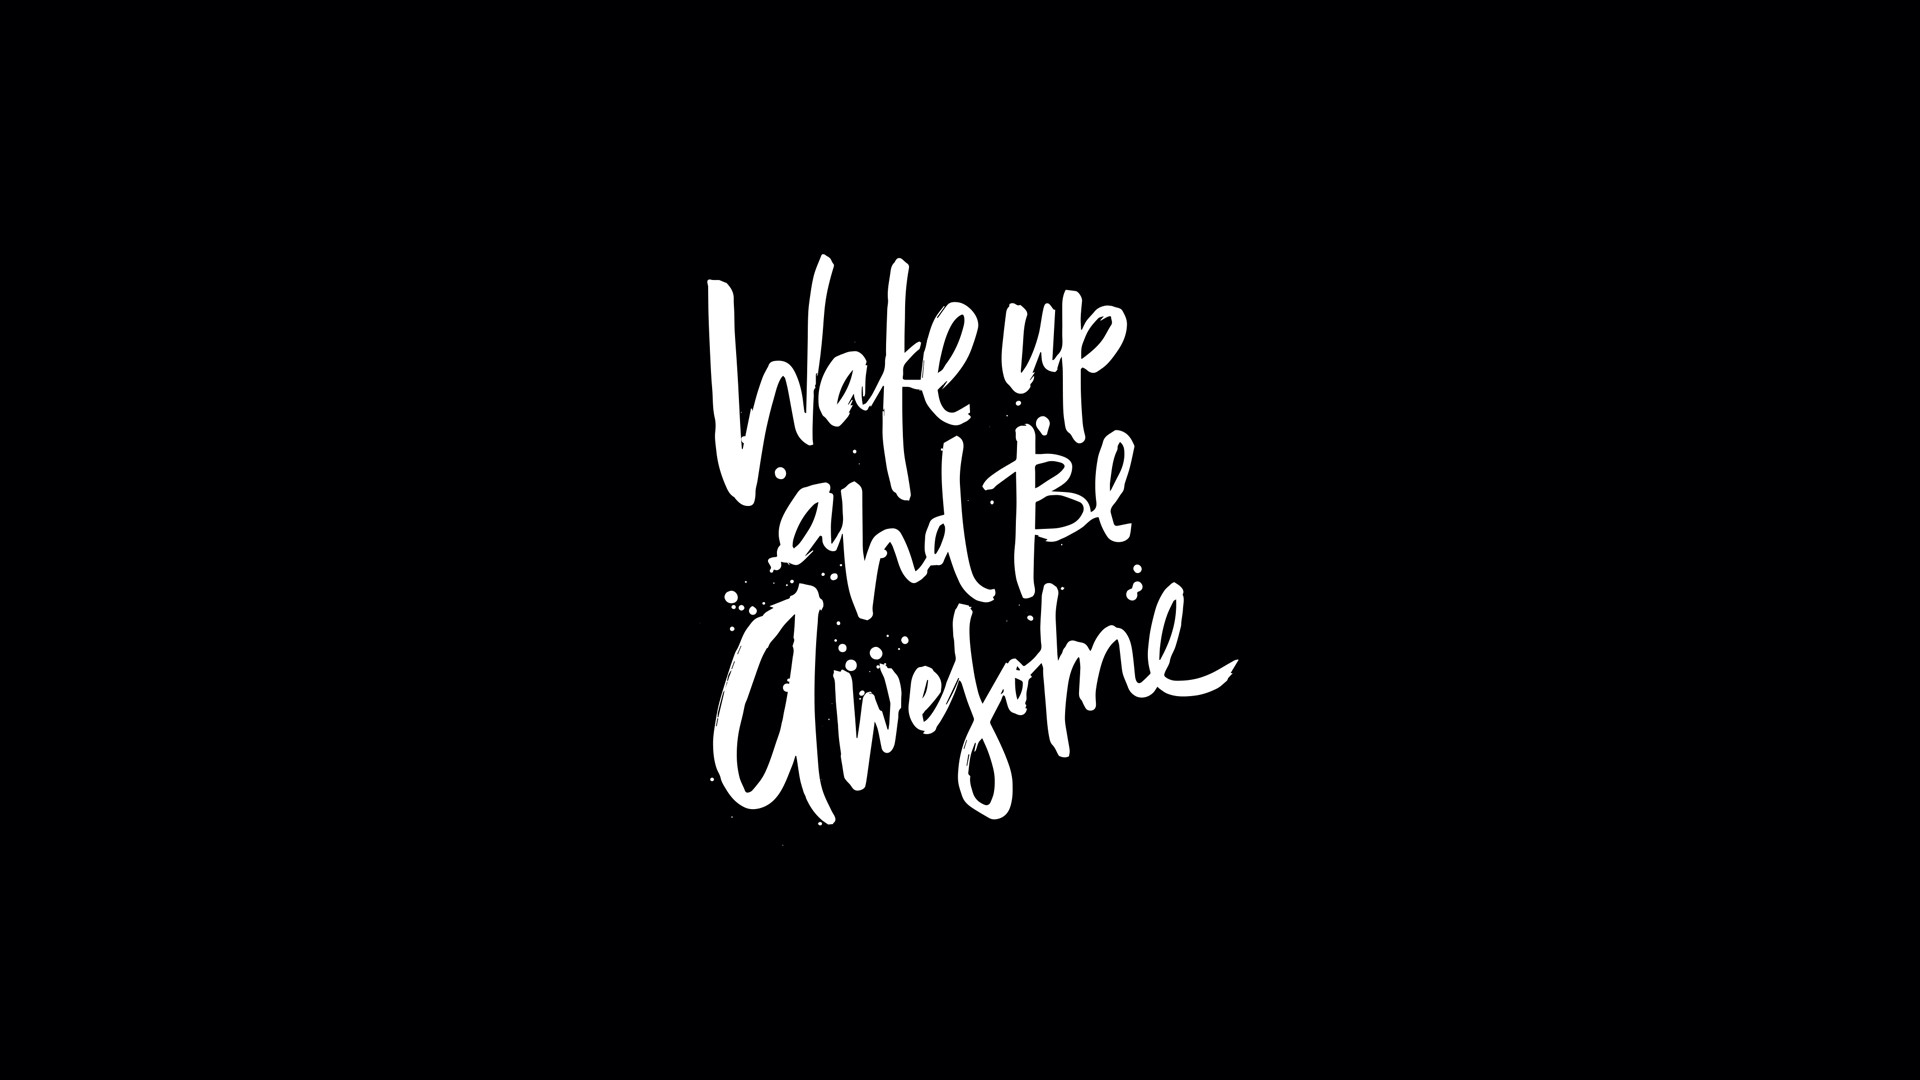 1920x1080 Cool Calligraphy Writing Wallpaper That Says "Wake Up And Be Awesome" |  PaperPull